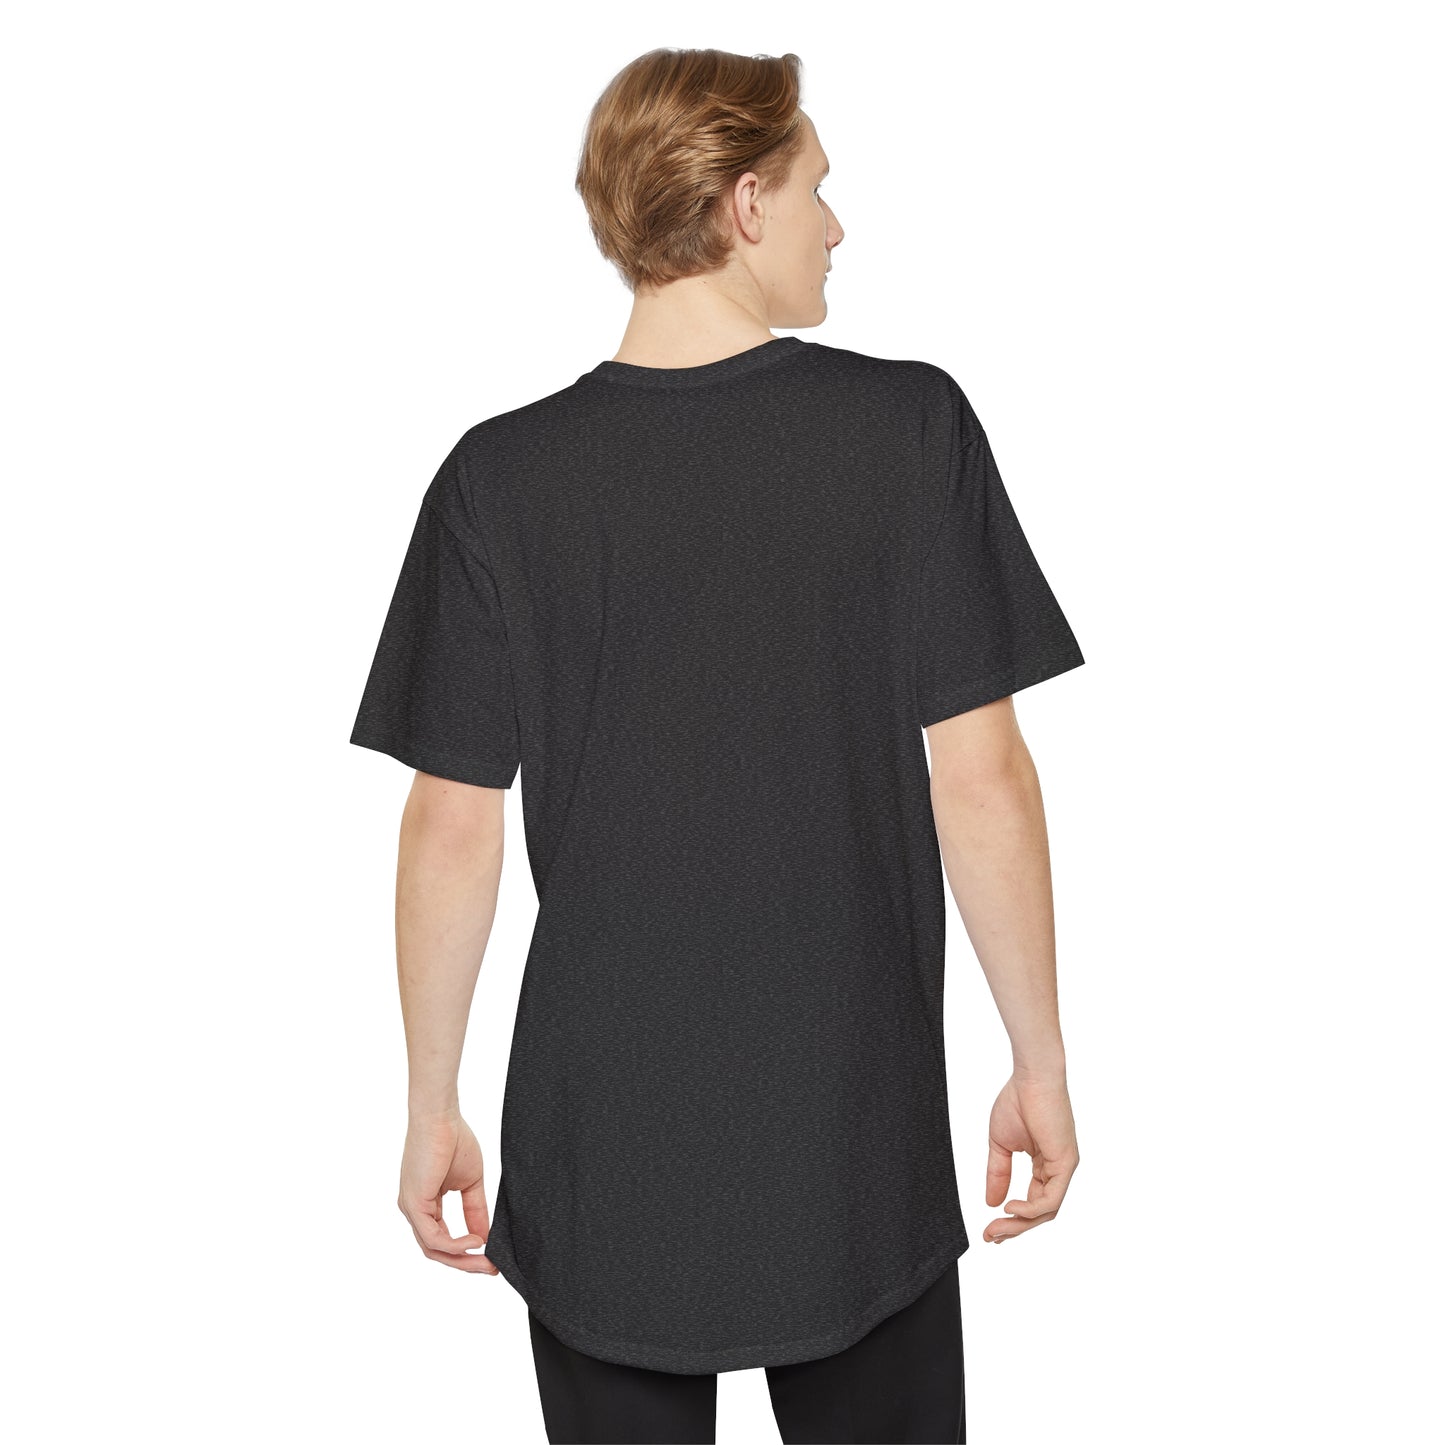 Forager Unisex Long Body Tee